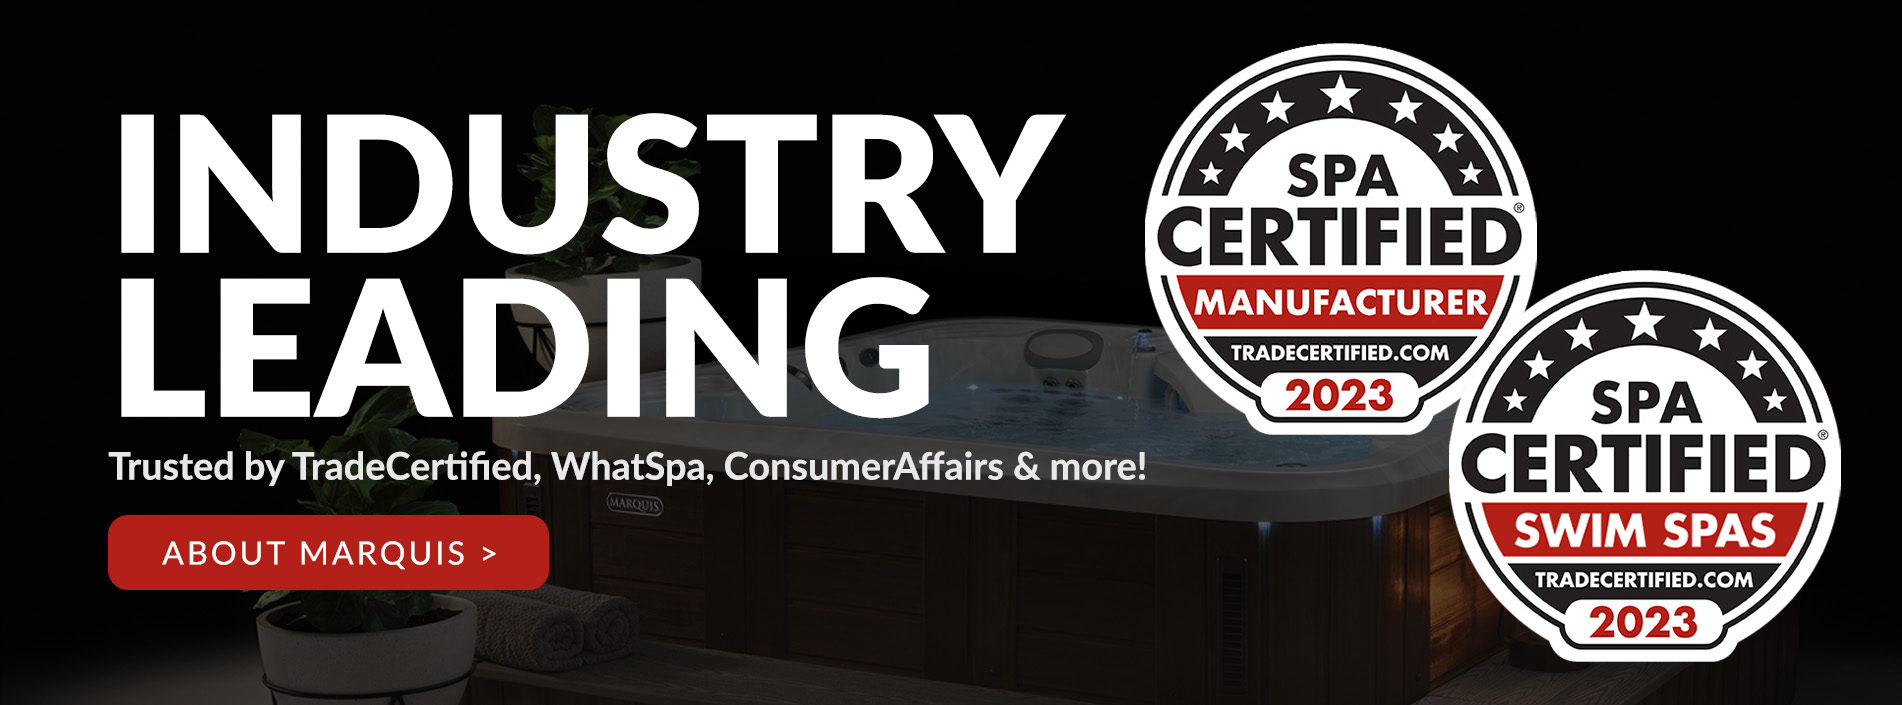 Industry Leading Recognitions from TradeCertified, WhatSpa, and ConsumerAffairs